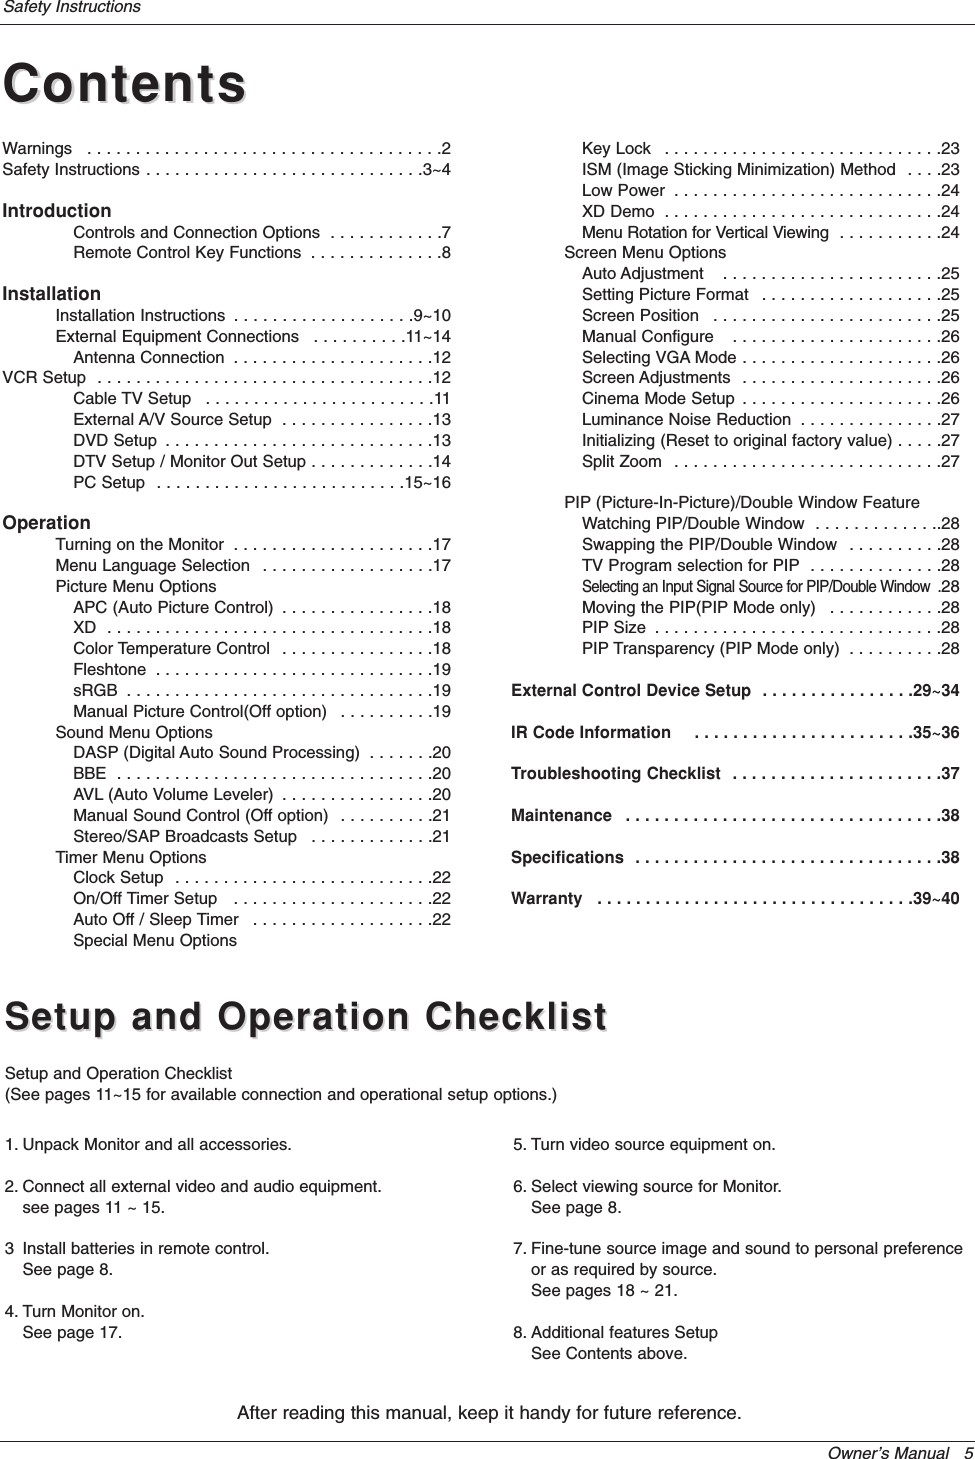 Owner’s Manual   5Safety InstructionsContentsContentsAfter reading this manual, keep it handy for future reference.Setup and Operation ChecklistSetup and Operation ChecklistSetup and Operation Checklist(See pages 11~15 for available connection and operational setup options.)1. Unpack Monitor and all accessories.2. Connect all external video and audio equipment.see pages 11 ~ 15.3 Install batteries in remote control.See page 8.4. Turn Monitor on.See page 17.5. Turn video source equipment on.6. Select viewing source for Monitor.See page 8.7. Fine-tune source image and sound to personal preferenceor as required by source. See pages 18 ~ 21.8. Additional features SetupSee Contents above.Warnings  . . . . . . . . . . . . . . . . . . . . . . . . . . . . . . . . . . . . .2Safety Instructions . . . . . . . . . . . . . . . . . . . . . . . . . . . . .3~4IntroductionControls and Connection Options  . . . . . . . . . . . .7Remote Control Key Functions  . . . . . . . . . . . . . .8InstallationInstallation Instructions  . . . . . . . . . . . . . . . . . . .9~10External Equipment Connections  . . . . . . . . . .11~14Antenna Connection  . . . . . . . . . . . . . . . . . . . . .12VCR Setup  . . . . . . . . . . . . . . . . . . . . . . . . . . . . . . . . . . .12Cable TV Setup  . . . . . . . . . . . . . . . . . . . . . . . .11External A/V Source Setup  . . . . . . . . . . . . . . . .13DVD Setup  . . . . . . . . . . . . . . . . . . . . . . . . . . . .13DTV Setup / Monitor Out Setup . . . . . . . . . . . . .14PC Setup  . . . . . . . . . . . . . . . . . . . . . . . . . .15~16OperationTurning on the Monitor  . . . . . . . . . . . . . . . . . . . . .17Menu Language Selection  . . . . . . . . . . . . . . . . . .17Picture Menu OptionsAPC (Auto Picture Control)  . . . . . . . . . . . . . . . .18XD  . . . . . . . . . . . . . . . . . . . . . . . . . . . . . . . . . .18Color Temperature Control  . . . . . . . . . . . . . . . .18Fleshtone  . . . . . . . . . . . . . . . . . . . . . . . . . . . . .19sRGB  . . . . . . . . . . . . . . . . . . . . . . . . . . . . . . . .19Manual Picture Control(Off option)  . . . . . . . . . .19Sound Menu OptionsDASP (Digital Auto Sound Processing)  . . . . . . .20BBE  . . . . . . . . . . . . . . . . . . . . . . . . . . . . . . . . .20AVL (Auto Volume Leveler)  . . . . . . . . . . . . . . . .20Manual Sound Control (Off option)  . . . . . . . . . .21Stereo/SAP Broadcasts Setup  . . . . . . . . . . . . .21Timer Menu OptionsClock Setup  . . . . . . . . . . . . . . . . . . . . . . . . . . .22On/Off Timer Setup   . . . . . . . . . . . . . . . . . . . . .22Auto Off / Sleep Timer  . . . . . . . . . . . . . . . . . . .22Special Menu OptionsKey Lock  . . . . . . . . . . . . . . . . . . . . . . . . . . . . .23ISM (Image Sticking Minimization) Method  . . . .23Low Power  . . . . . . . . . . . . . . . . . . . . . . . . . . . .24XD Demo  . . . . . . . . . . . . . . . . . . . . . . . . . . . . .24Menu Rotation for Vertical Viewing  . . . . . . . . . . .24Screen Menu OptionsAuto Adjustment   . . . . . . . . . . . . . . . . . . . . . . .25Setting Picture Format  . . . . . . . . . . . . . . . . . . .25Screen Position   . . . . . . . . . . . . . . . . . . . . . . . .25Manual Configure   . . . . . . . . . . . . . . . . . . . . . .26Selecting VGA Mode . . . . . . . . . . . . . . . . . . . . .26Screen Adjustments  . . . . . . . . . . . . . . . . . . . . .26Cinema Mode Setup  . . . . . . . . . . . . . . . . . . . . .26Luminance Noise Reduction  . . . . . . . . . . . . . . .27Initializing (Reset to original factory value) . . . . .27Split Zoom  . . . . . . . . . . . . . . . . . . . . . . . . . . . .27PIP (Picture-In-Picture)/Double Window FeatureWatching PIP/Double Window  . . . . . . . . . . . . ..28Swapping the PIP/Double Window  . . . . . . . . . .28TV Program selection for PIP  . . . . . . . . . . . . . .28Selecting an Input Signal Source for PIP/Double Window  .28Moving the PIP(PIP Mode only)  . . . . . . . . . . . .28PIP Size  . . . . . . . . . . . . . . . . . . . . . . . . . . . . . .28PIP Transparency (PIP Mode only)  . . . . . . . . . .28External Control Device Setup  . . . . . . . . . . . . . . . .29~34IR Code Information    . . . . . . . . . . . . . . . . . . . . . . .35~36Troubleshooting Checklist  . . . . . . . . . . . . . . . . . . . . . .37Maintenance  . . . . . . . . . . . . . . . . . . . . . . . . . . . . . . . . .38Specifications  . . . . . . . . . . . . . . . . . . . . . . . . . . . . . . . .38Warranty  . . . . . . . . . . . . . . . . . . . . . . . . . . . . . . . . .39~40